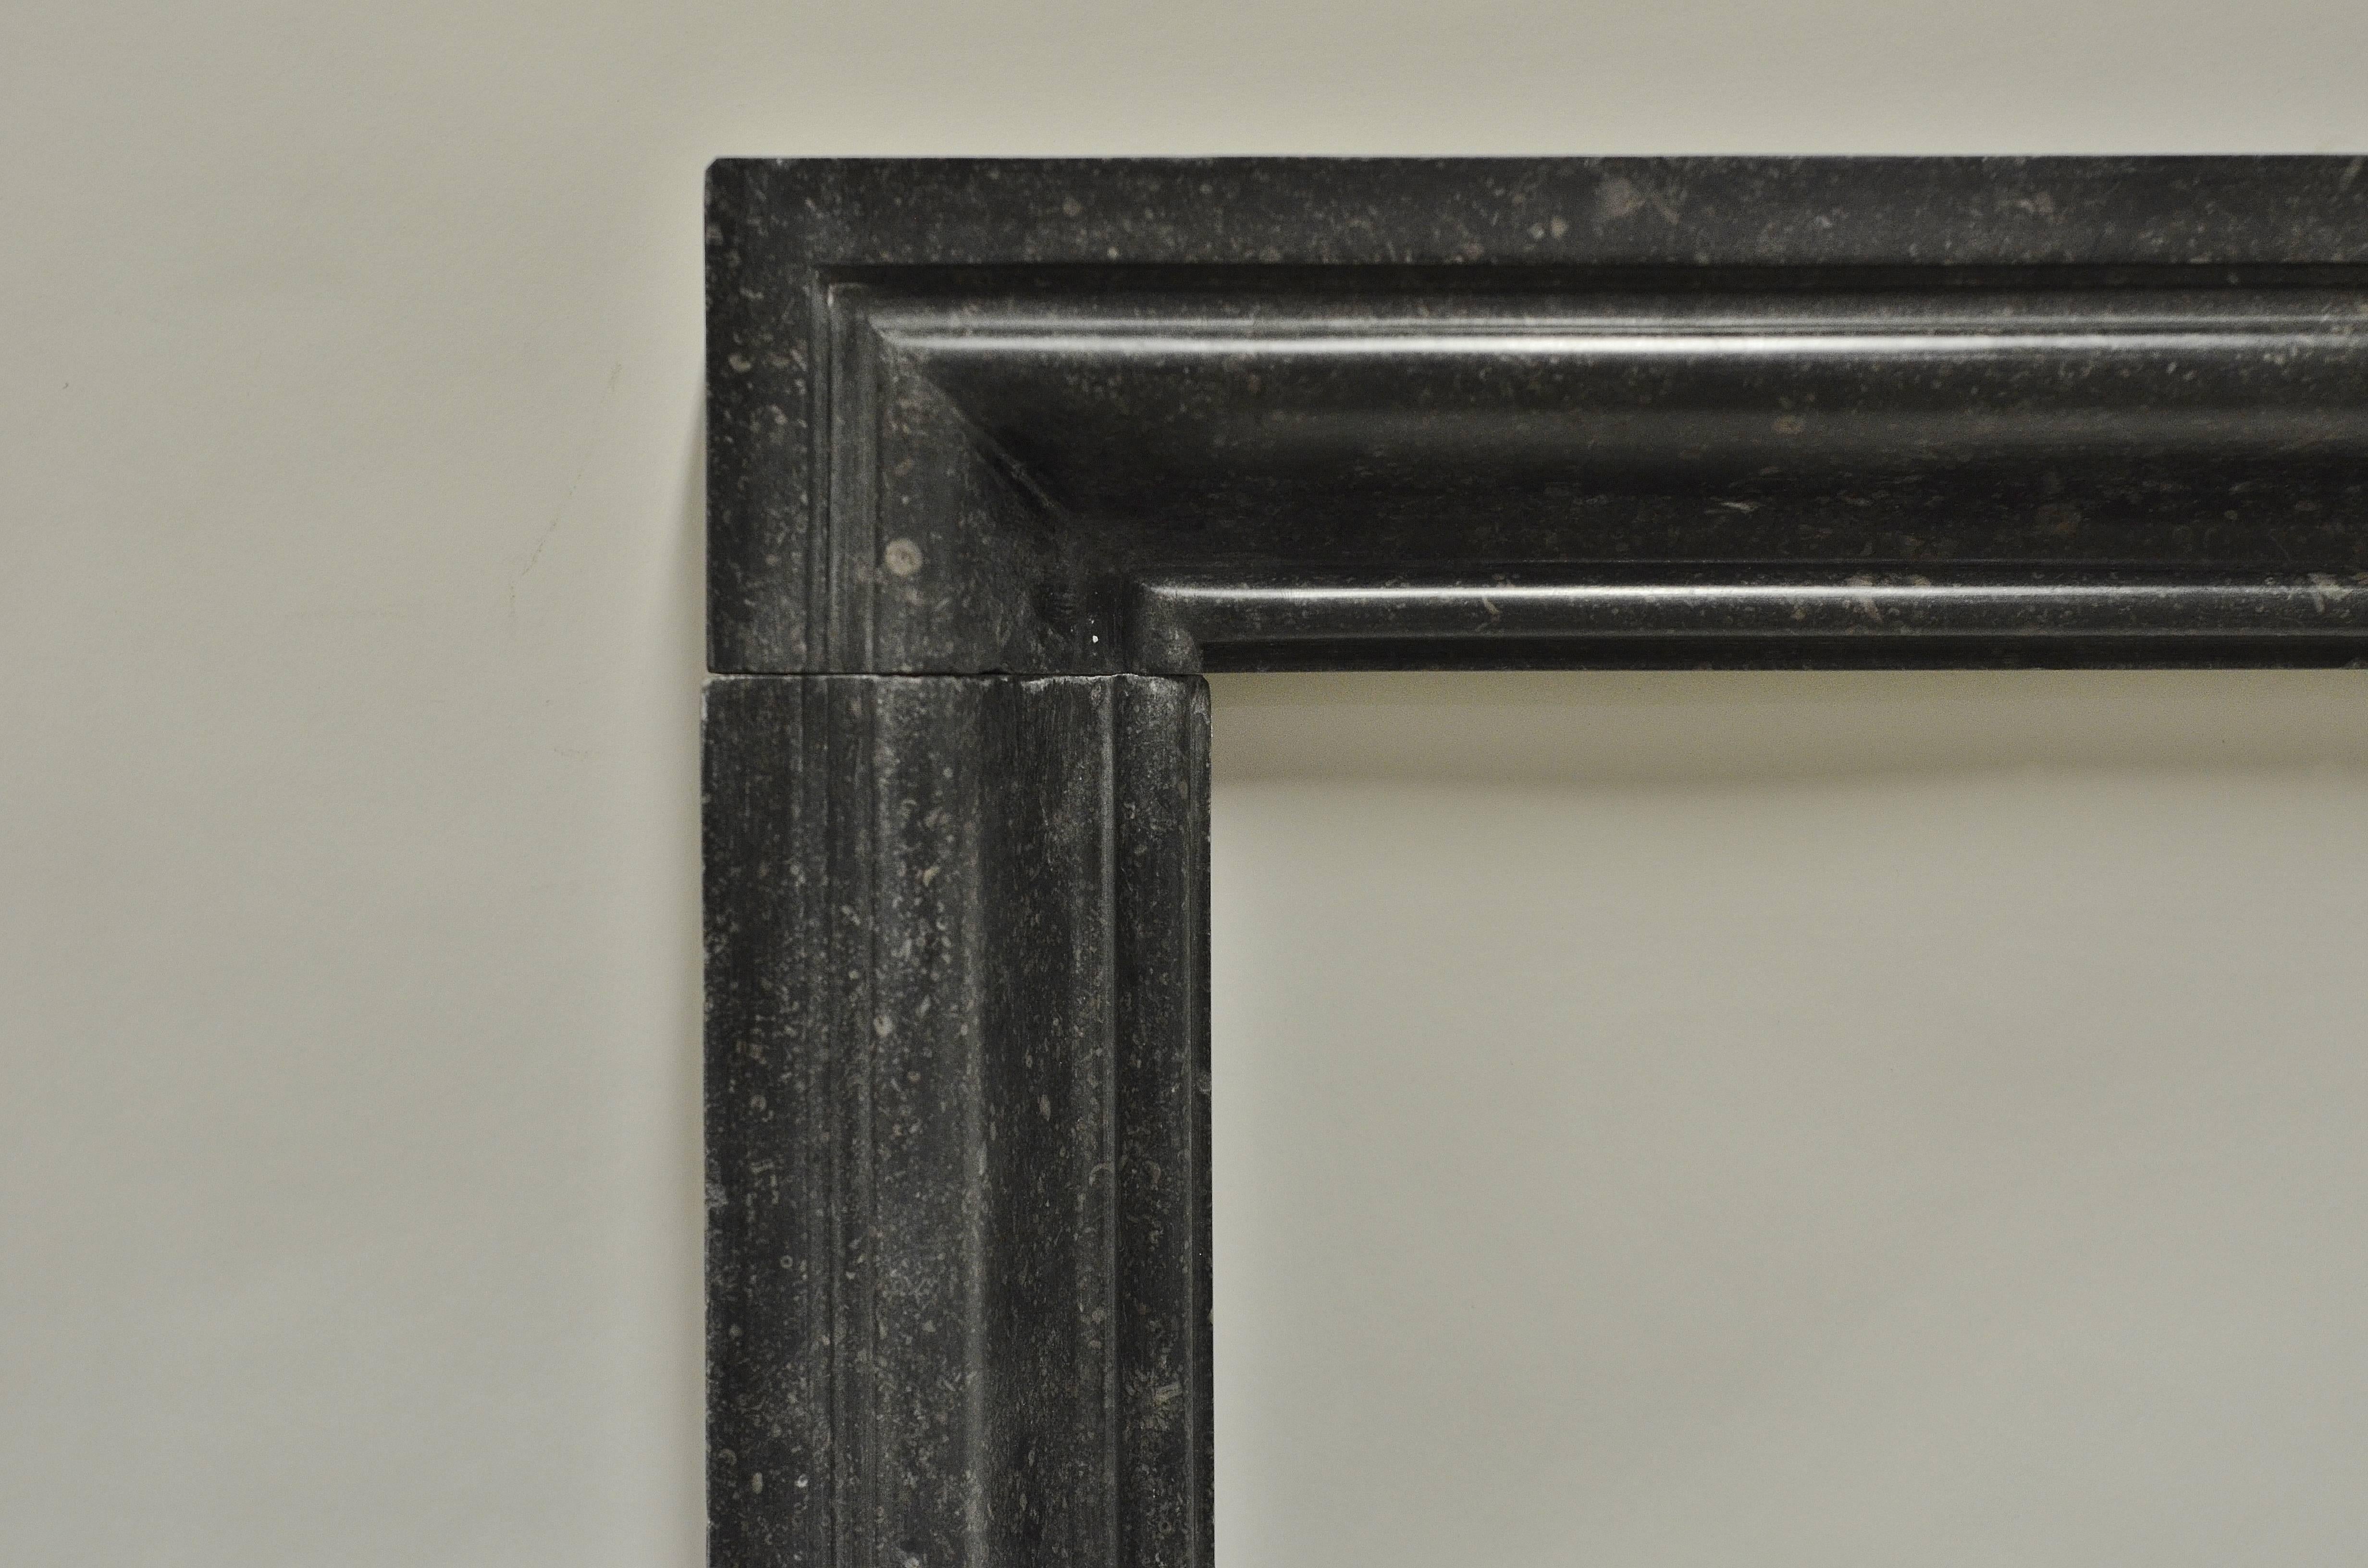 Lovely and small bollection fireplace mantel.

Opening measurements: 31.5 x 24.2 inch (height x width).